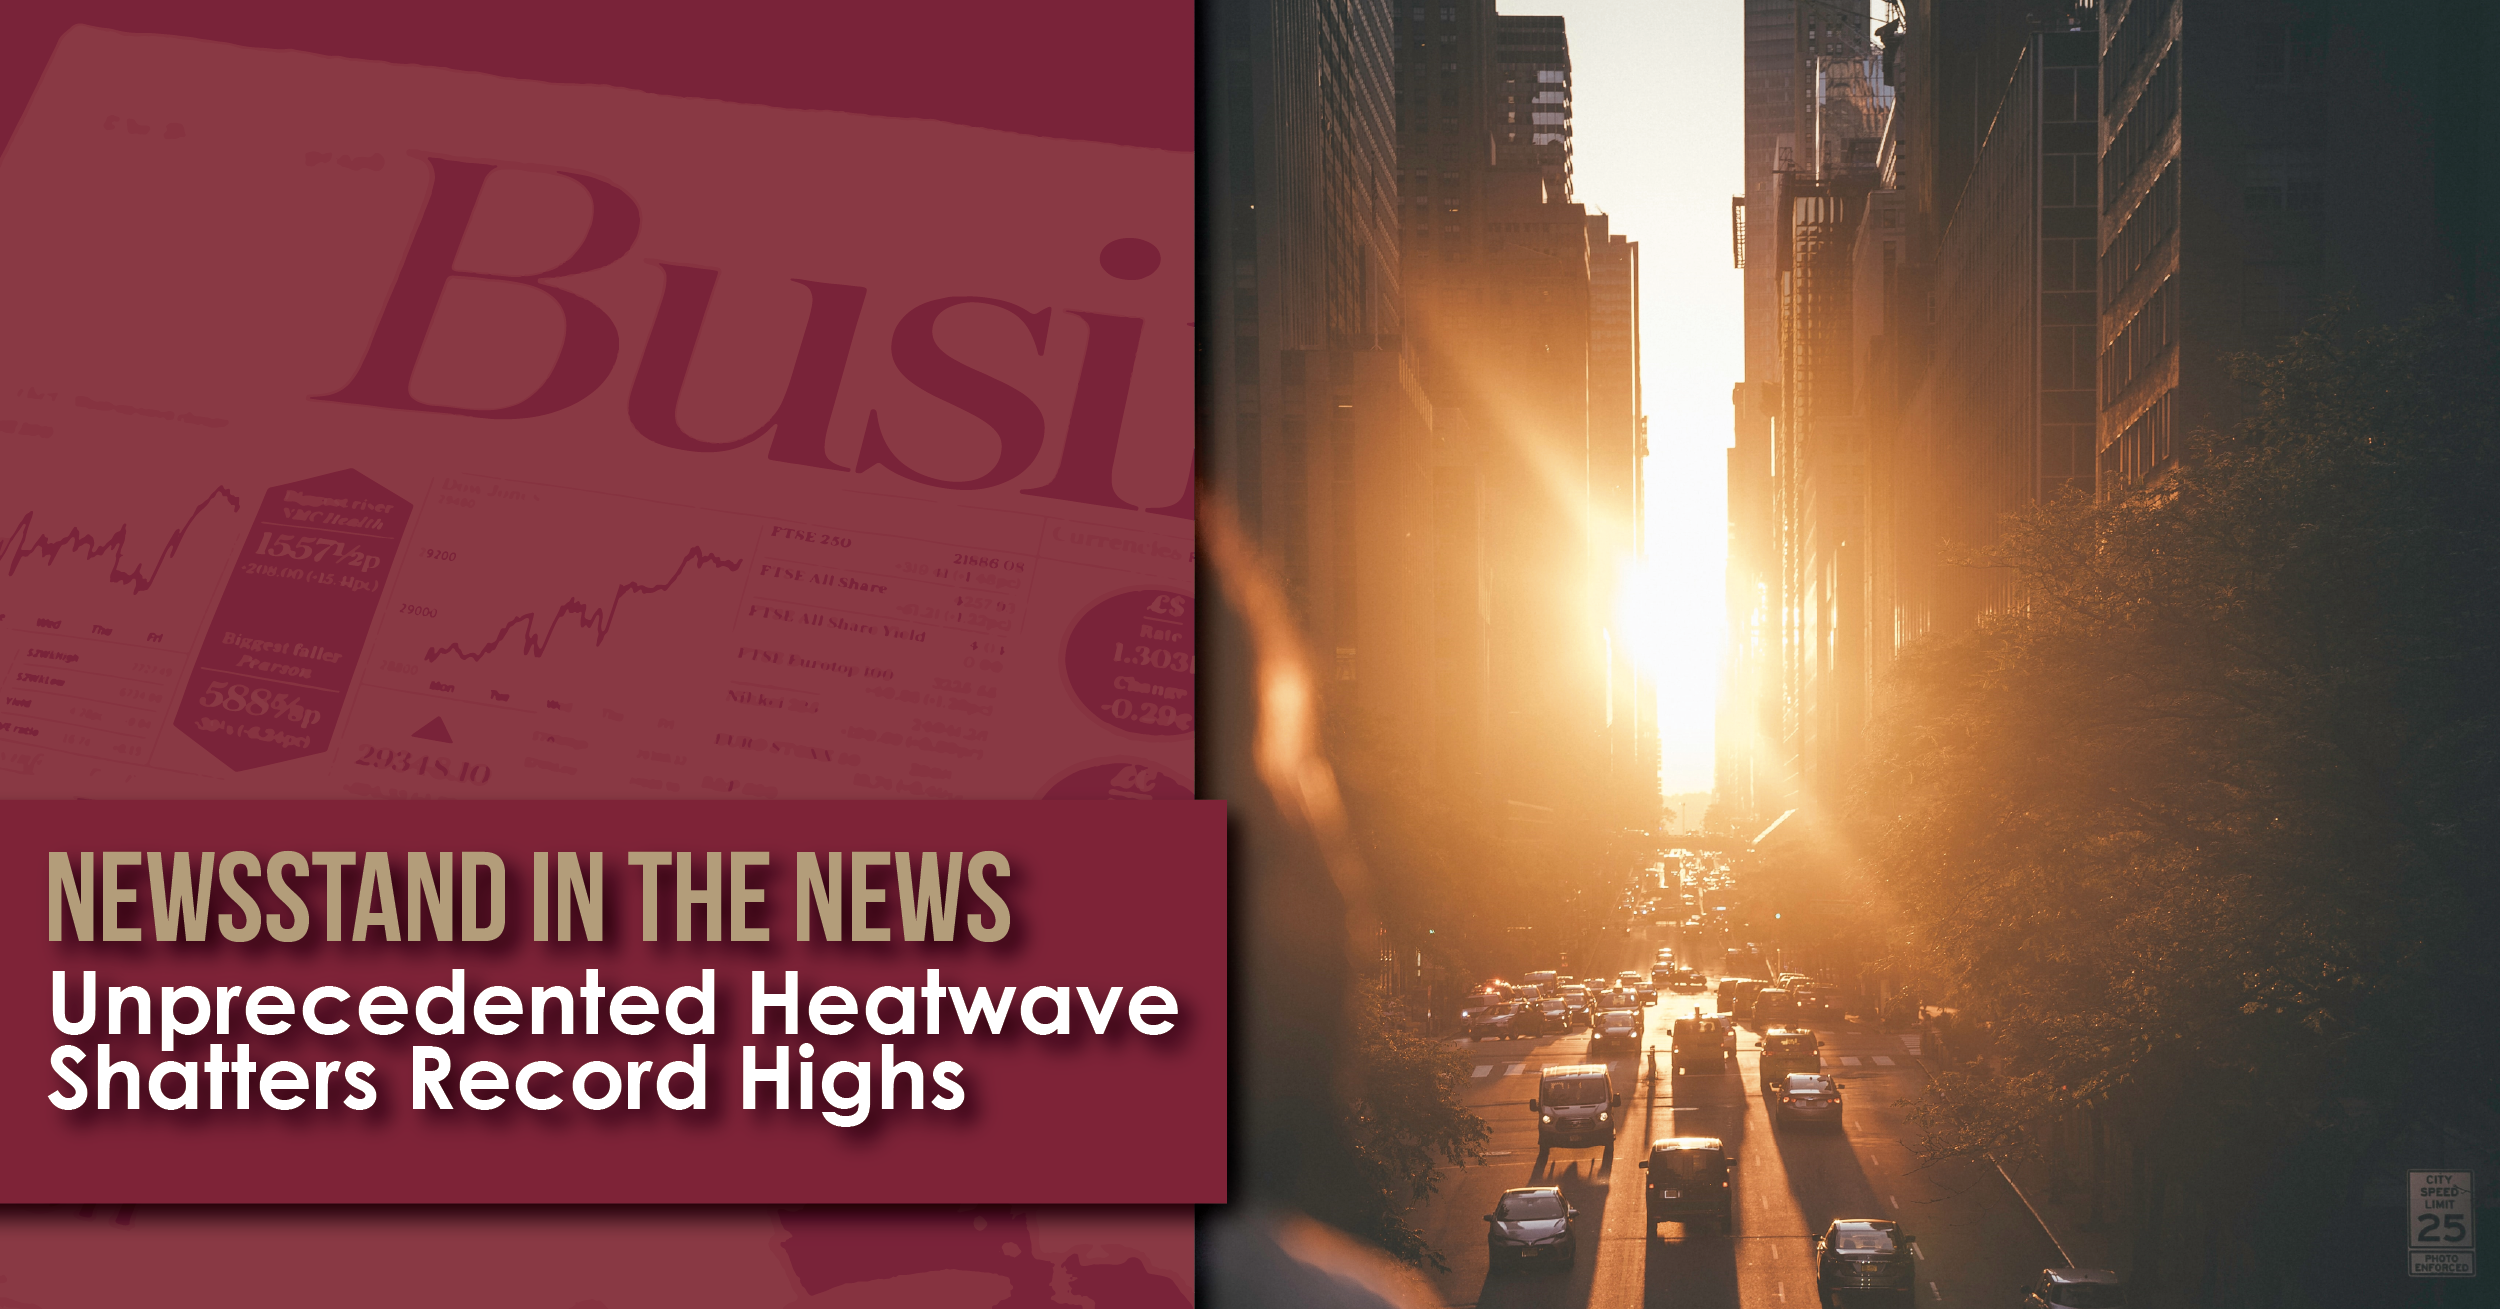 Newsstand in the News - Unprecedented Heatwave Shatters Record Highs